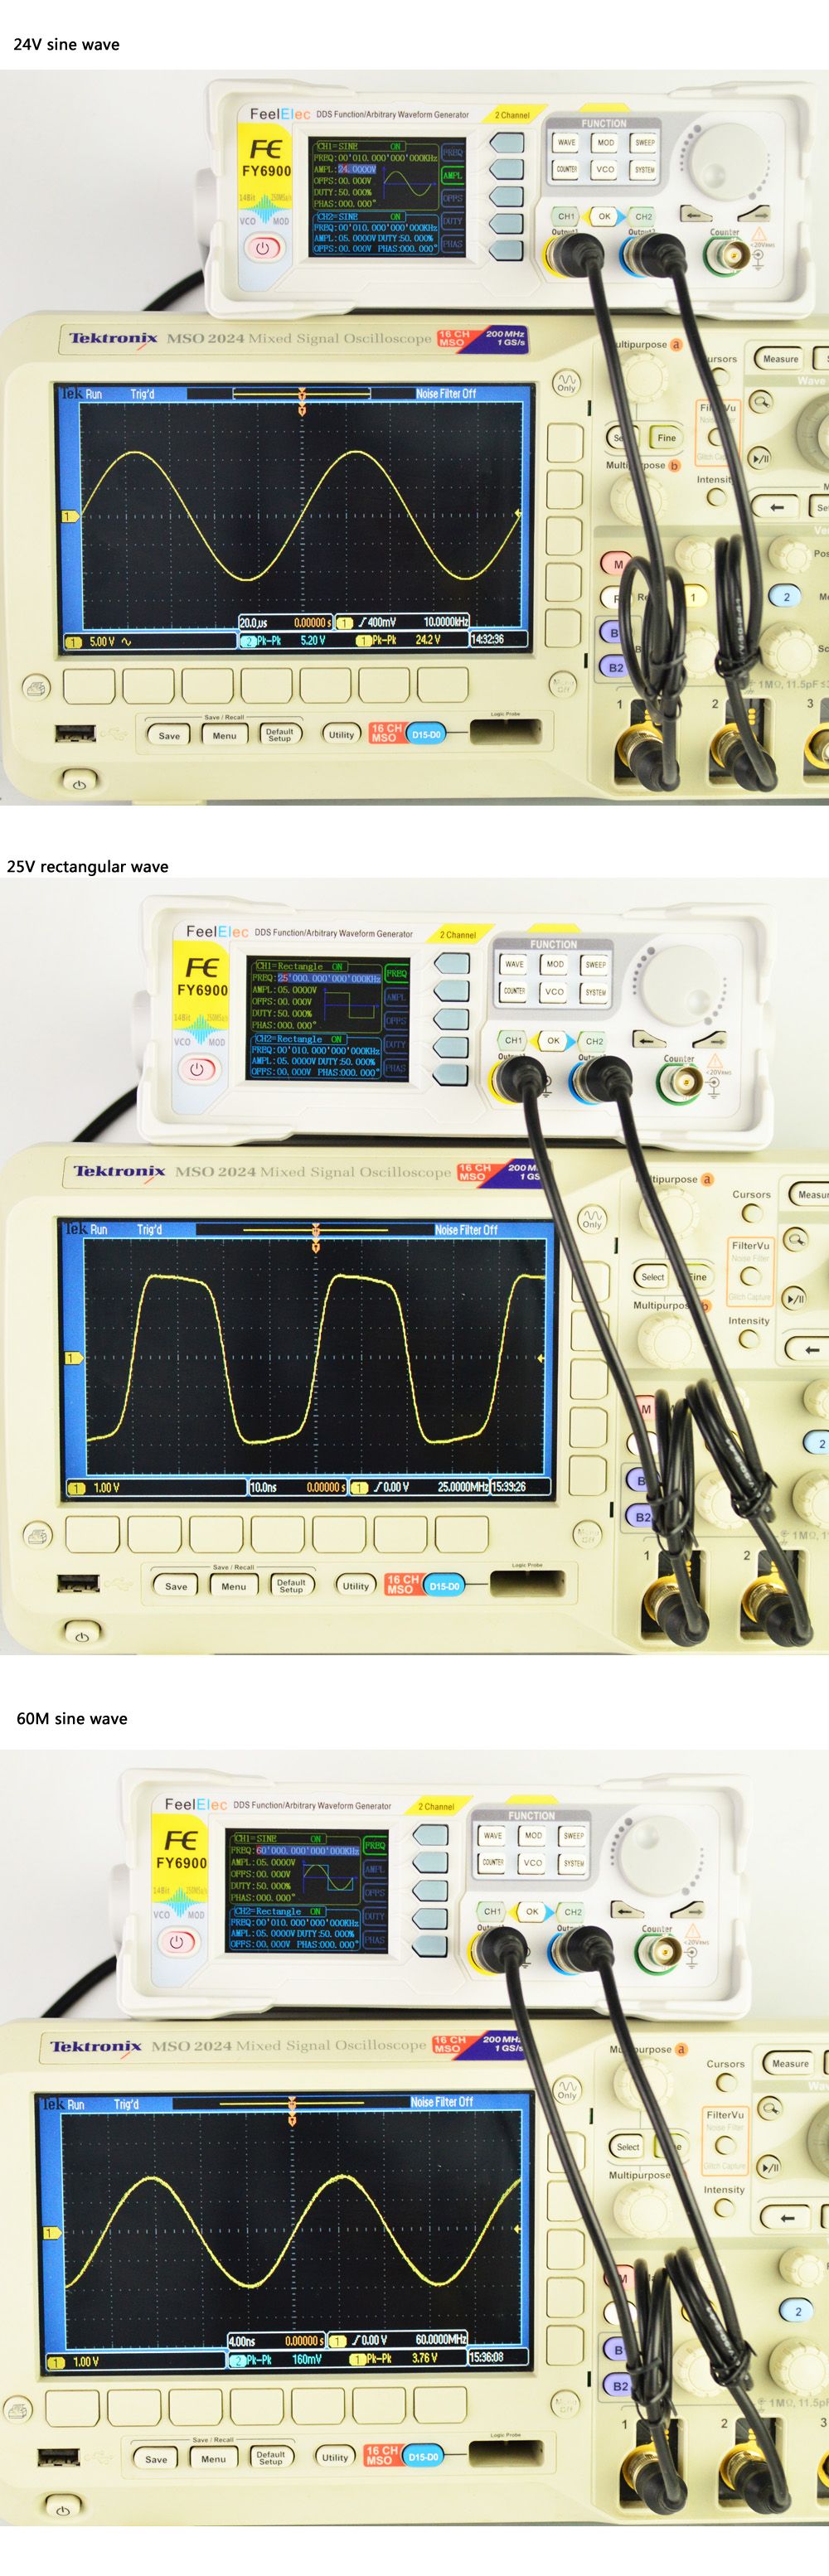 FY6900-Dual-Channel-DDS-Function-Arbitrary-Waveform-Signal-Generator-Pulse-Signal-Source-Frequency-C-1495502